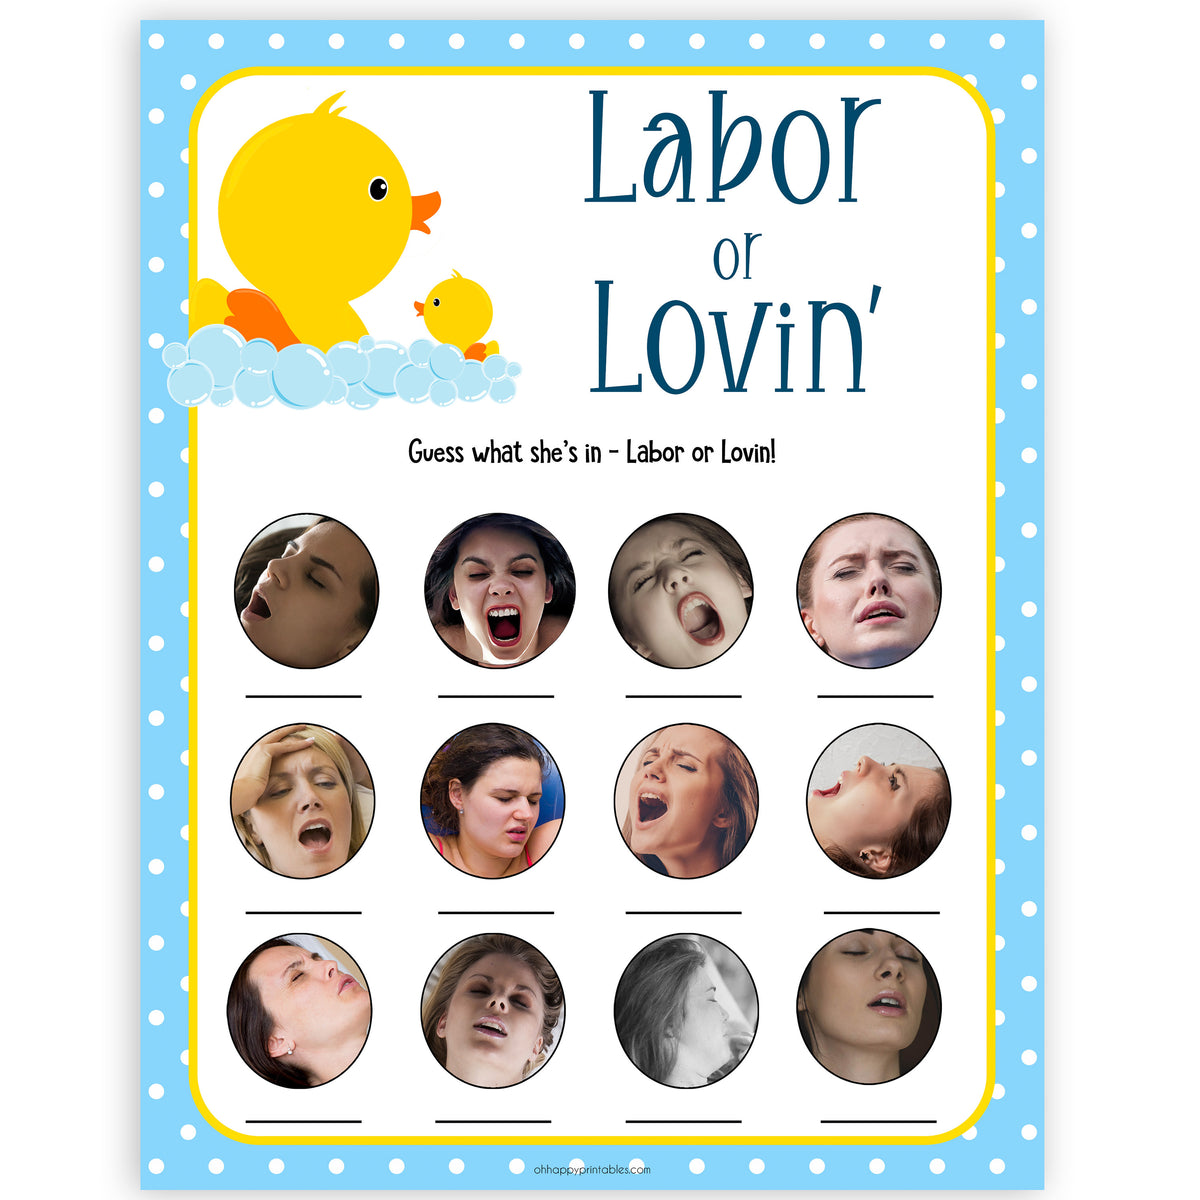 rubber ducky baby games, labour or lovin, labor or lovin, labor or porn baby game, printable baby games, baby shower games, rubber ducky baby theme, fun baby games, popular baby games